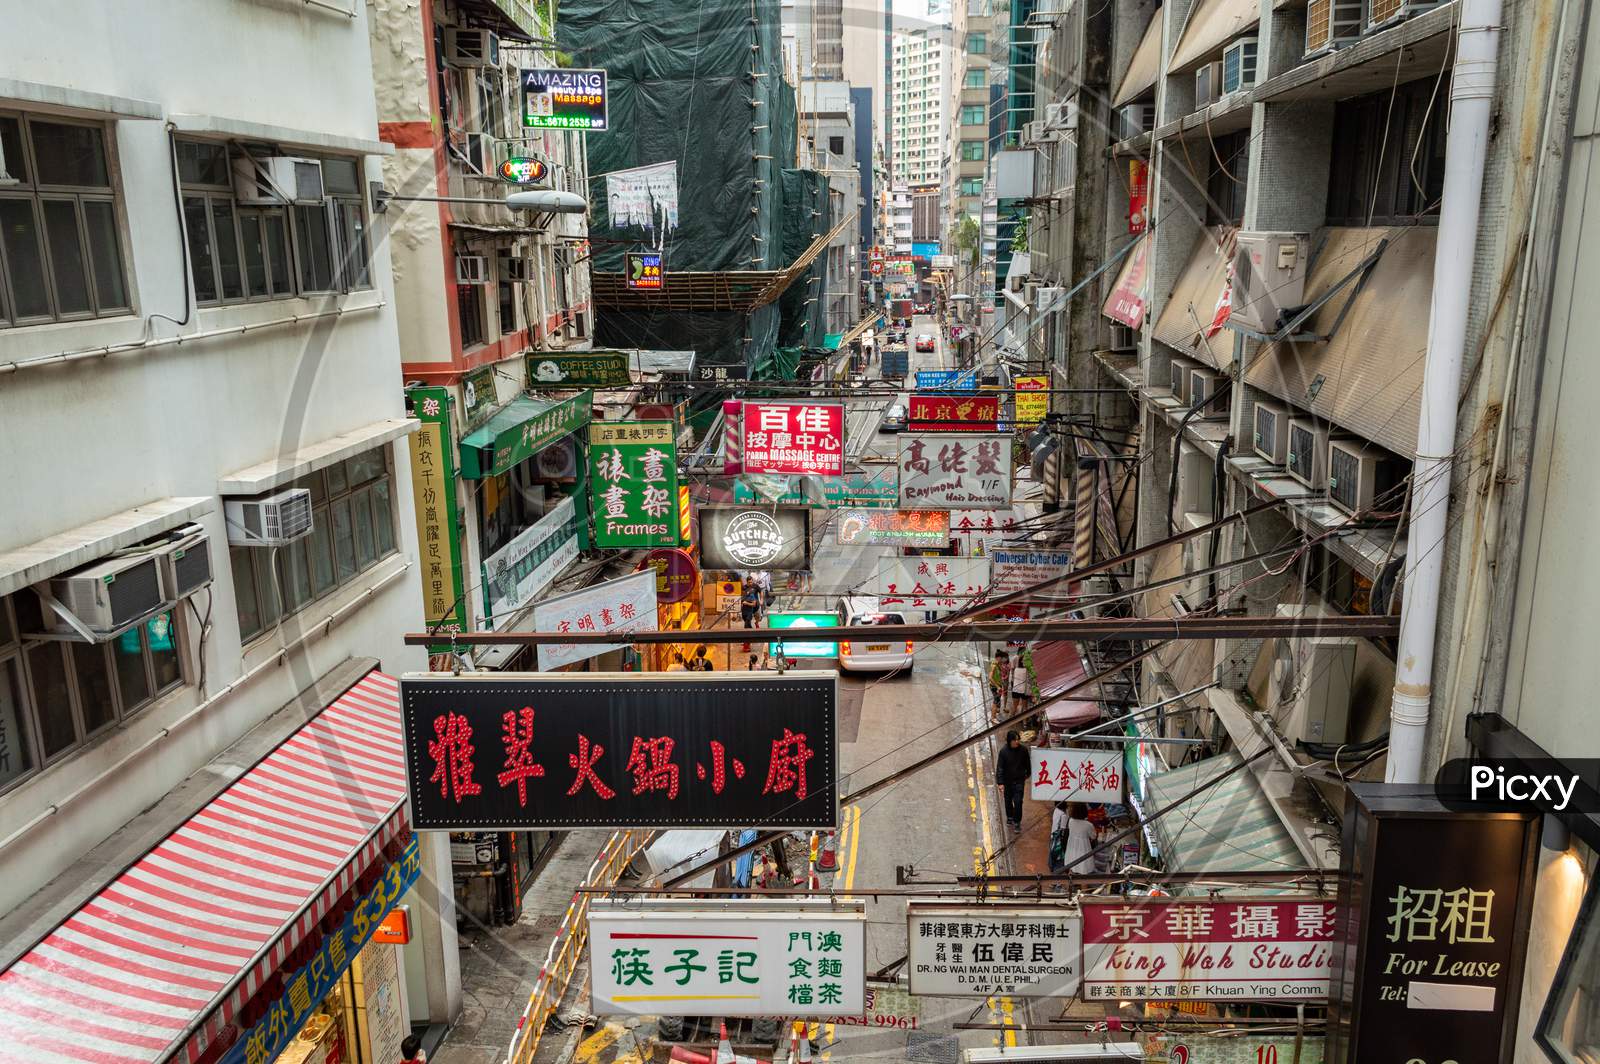 Neon Signs Advertising Stores In A Busy Street In Hong Kong